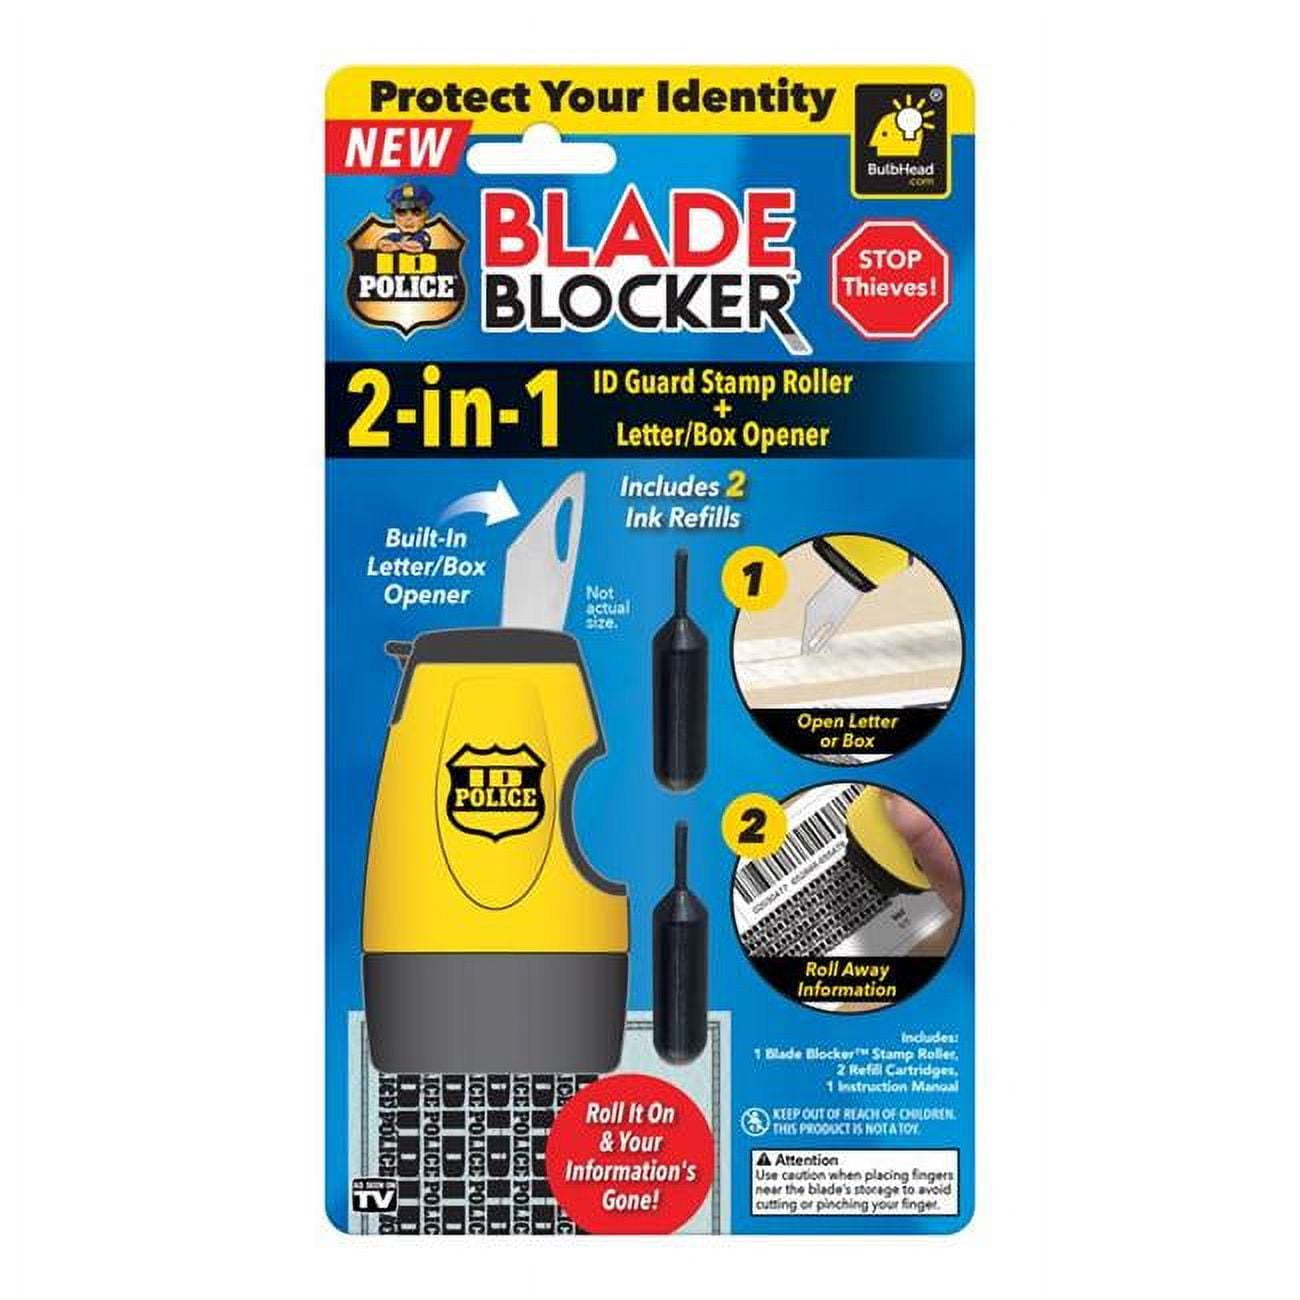 6061157 Blade Blocker Theft Protection ID Guard Stamp Roller & Box Opener, Black & Yellow